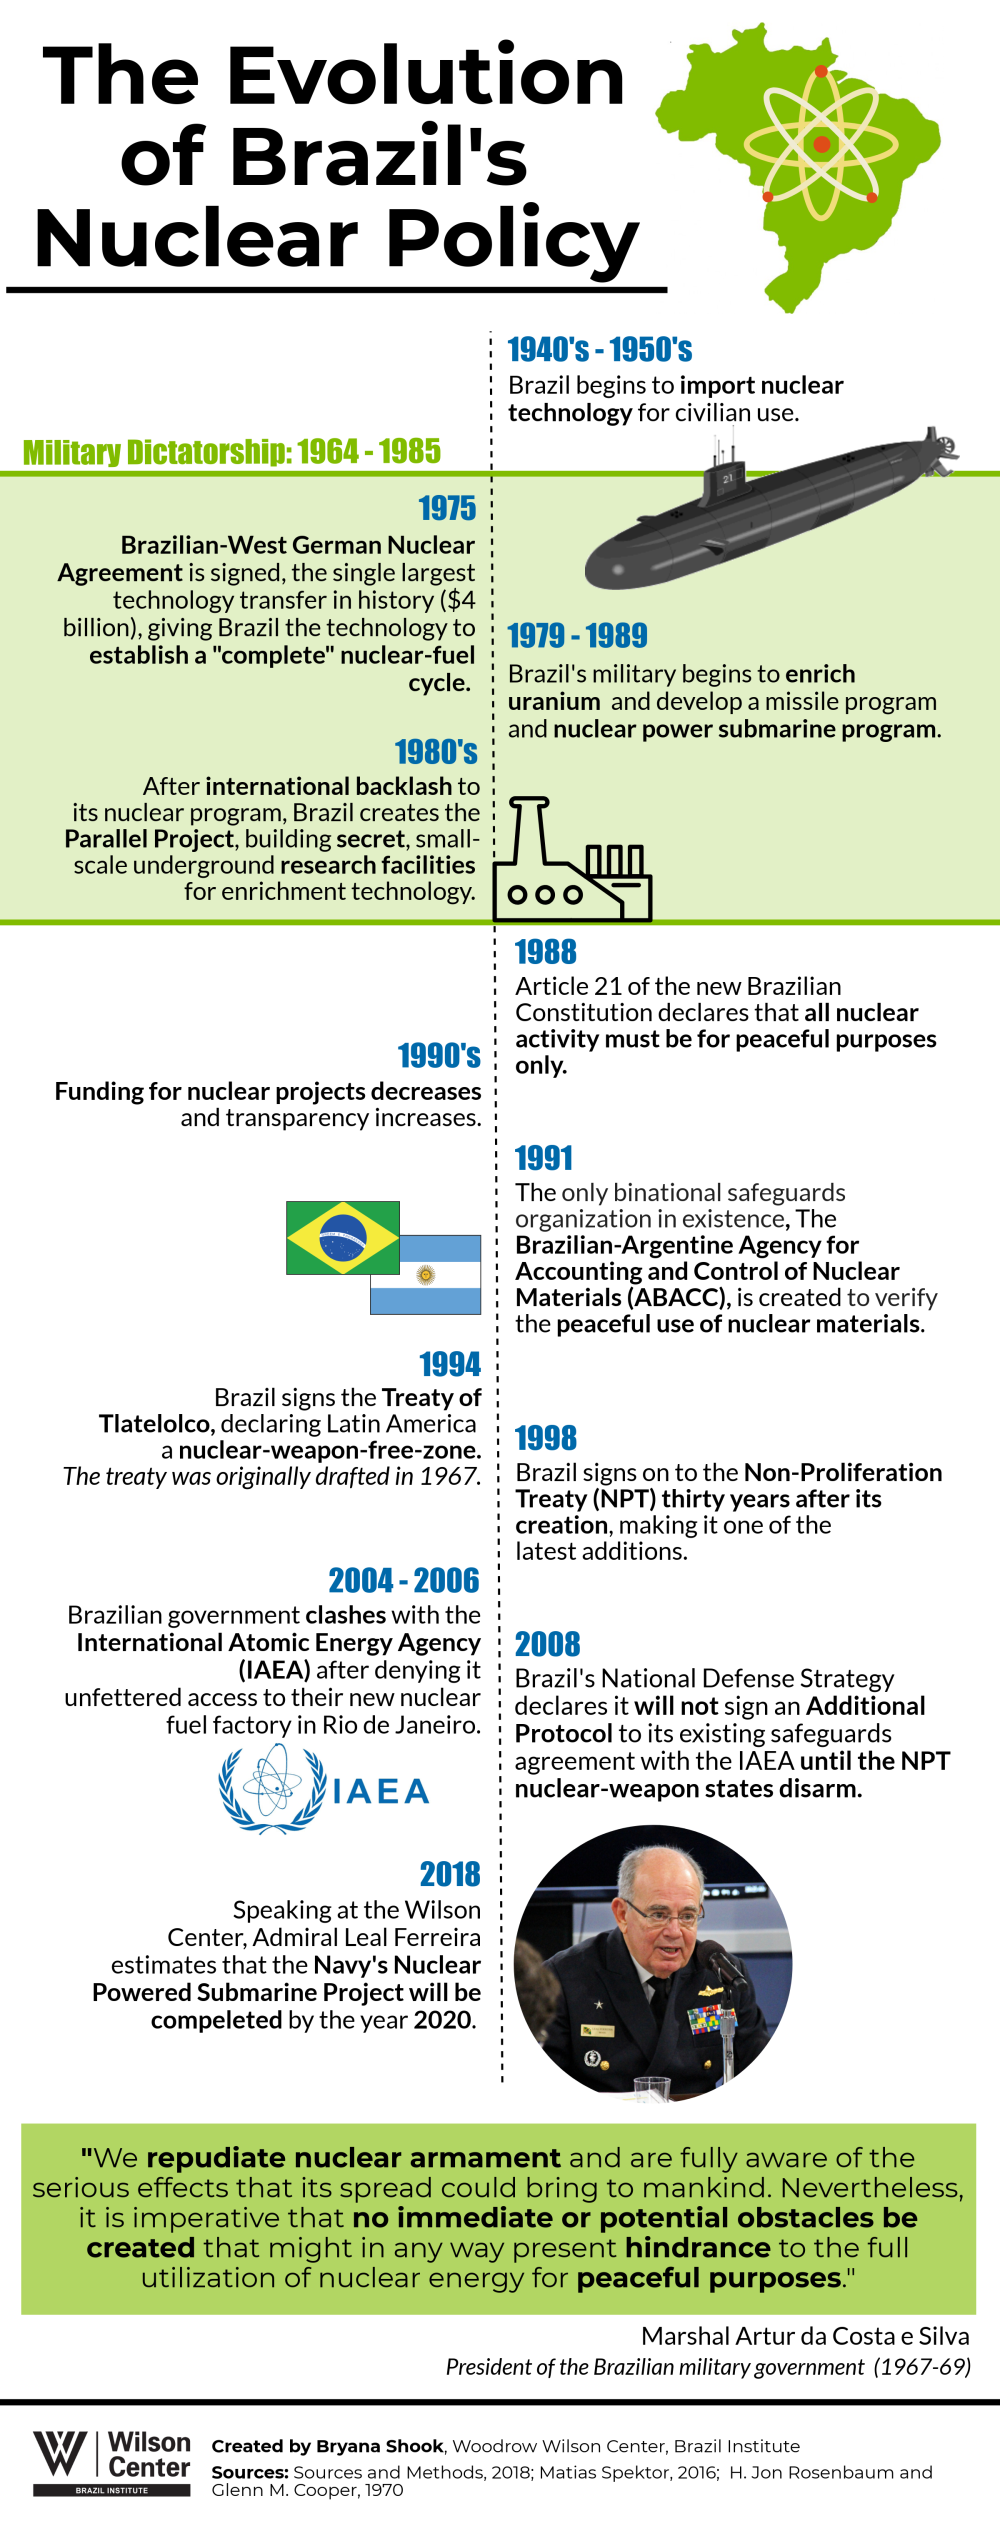 The Evolution of Brazil's Nuclear Policy